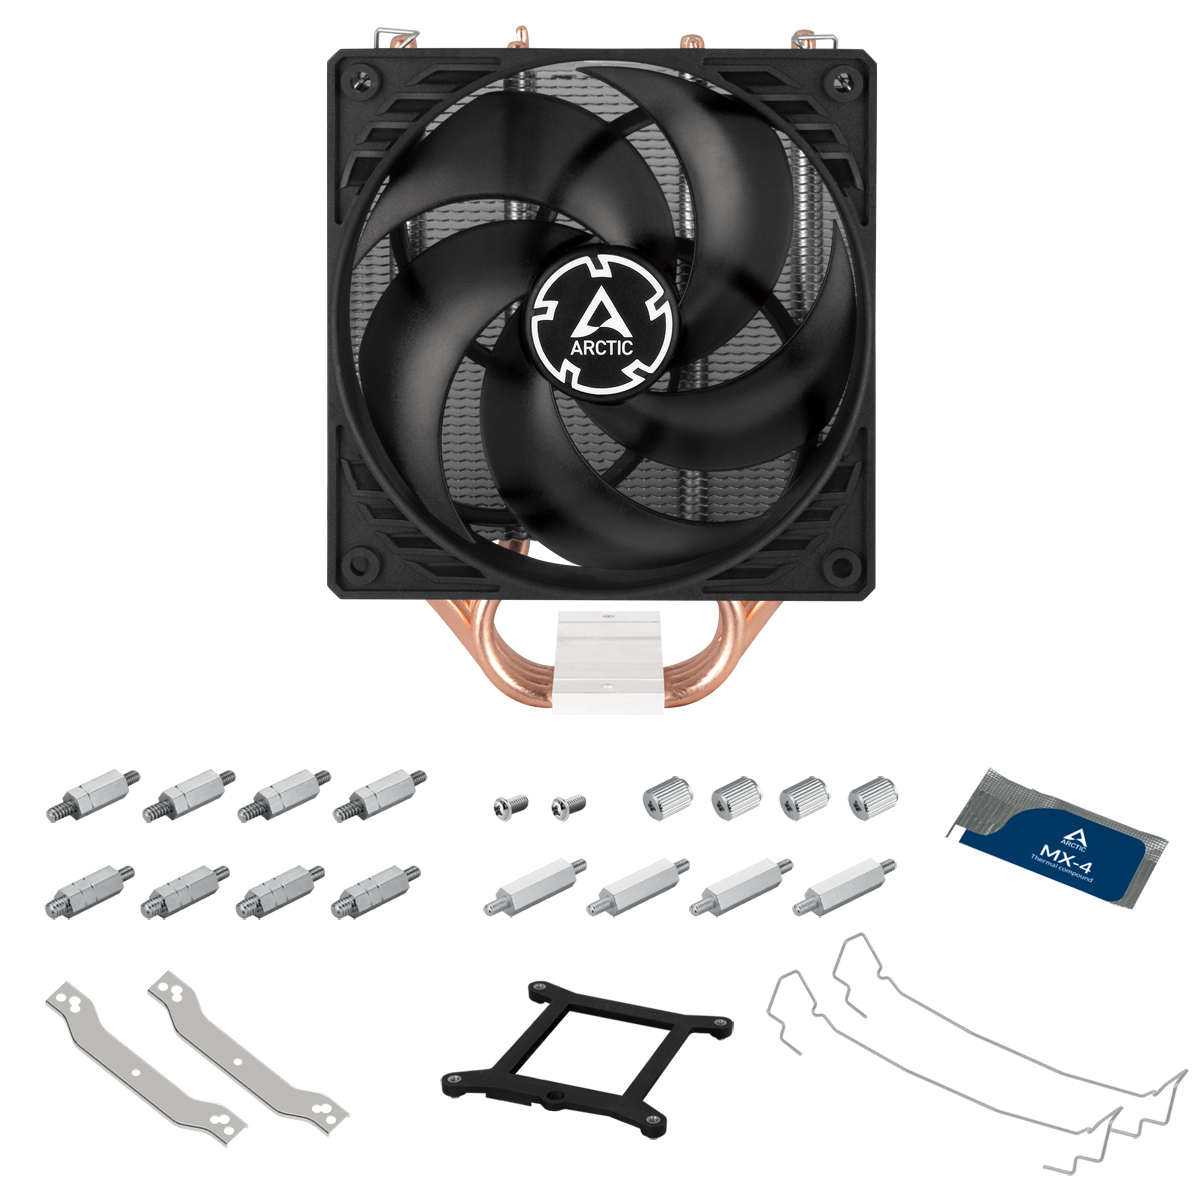 Tower CPU Cooler with 120 mm P-Fan ARCTIC Freezer 34 Package Contents